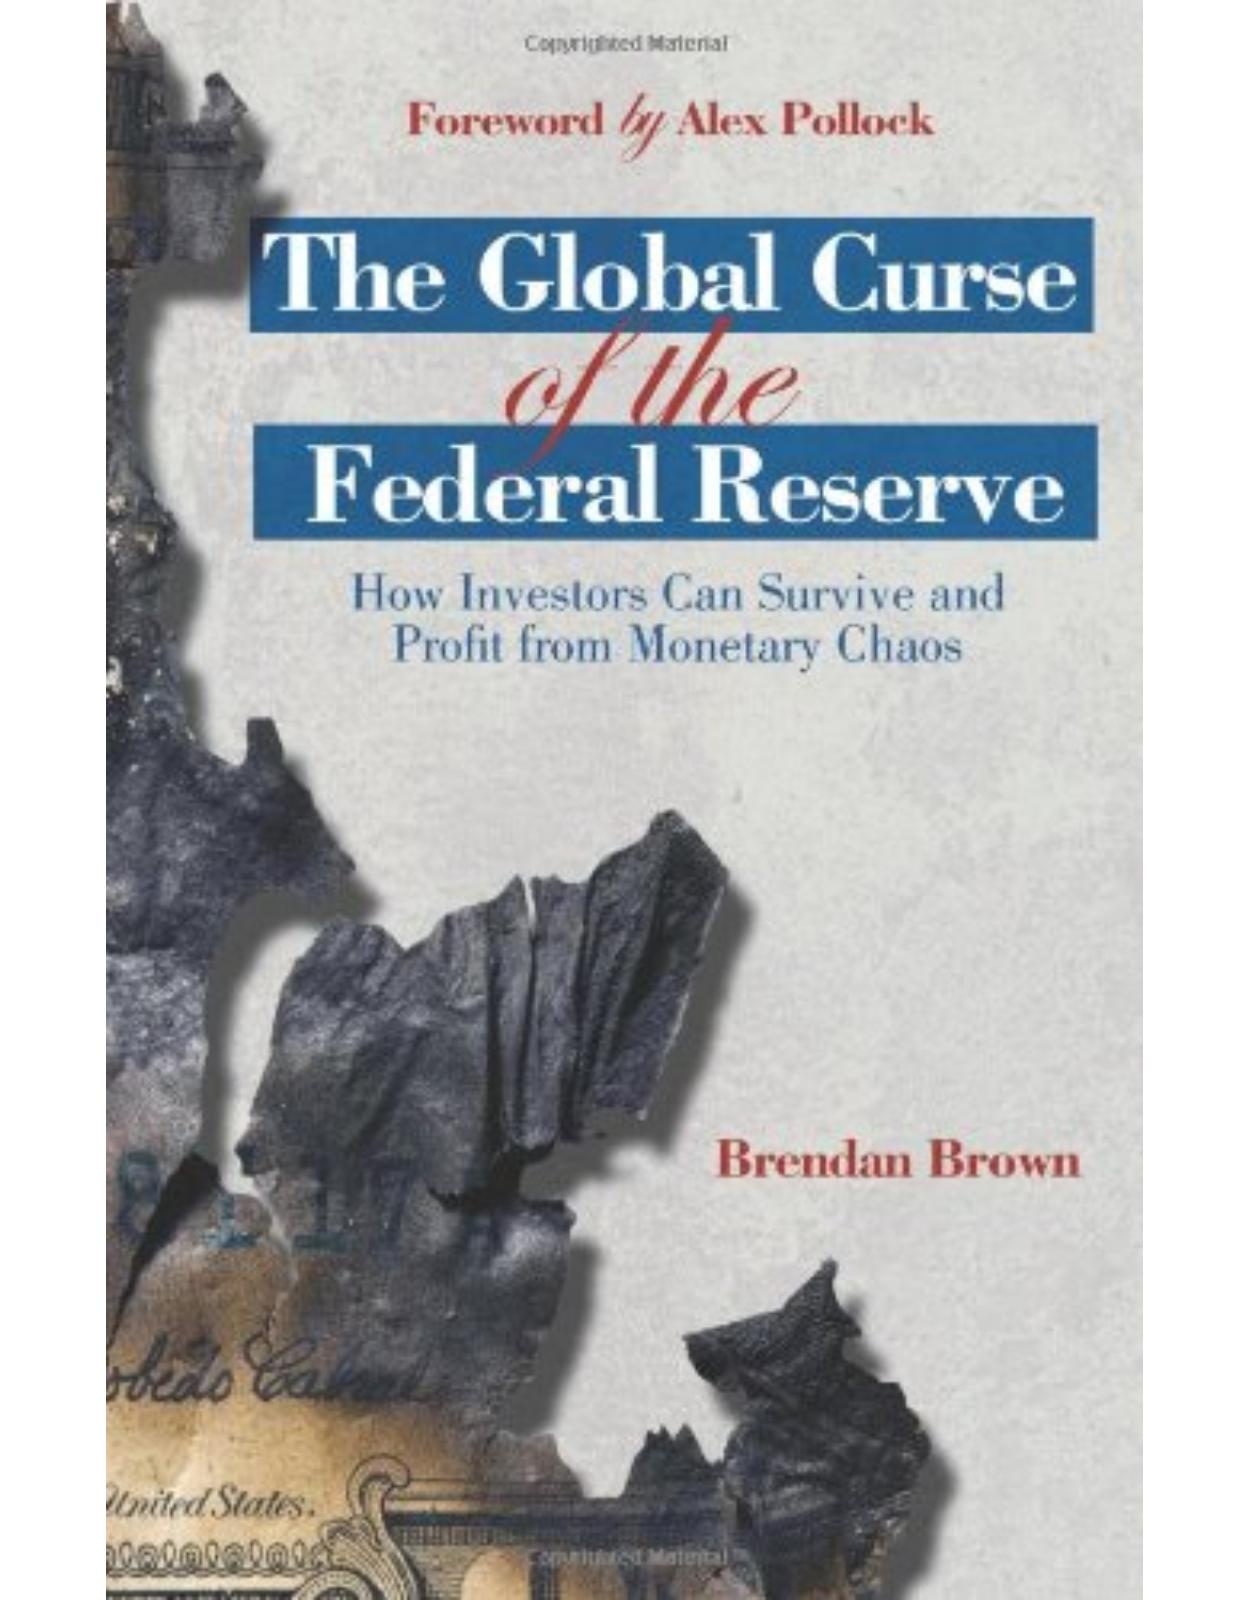 The Global Curse of the Federal Reserve: How Investors Can Survive and Profit From Monetary Chaos